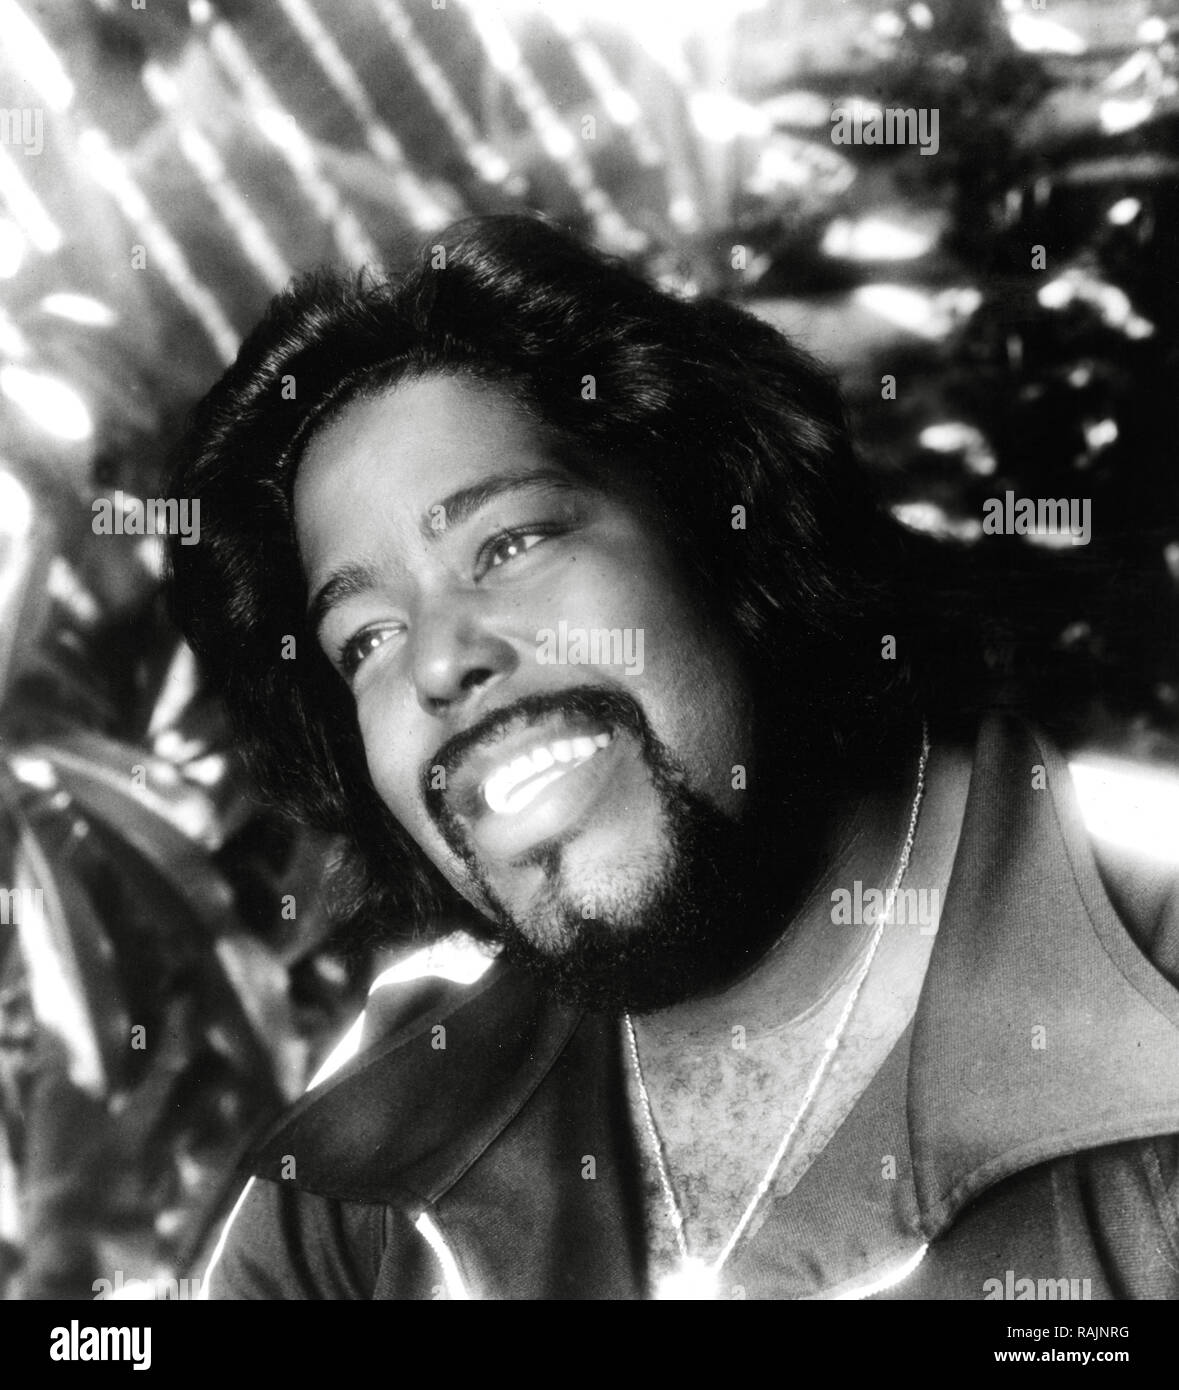 Publicity photo of Barry White,  circa 1974    File Reference # 33636 934THA Stock Photo